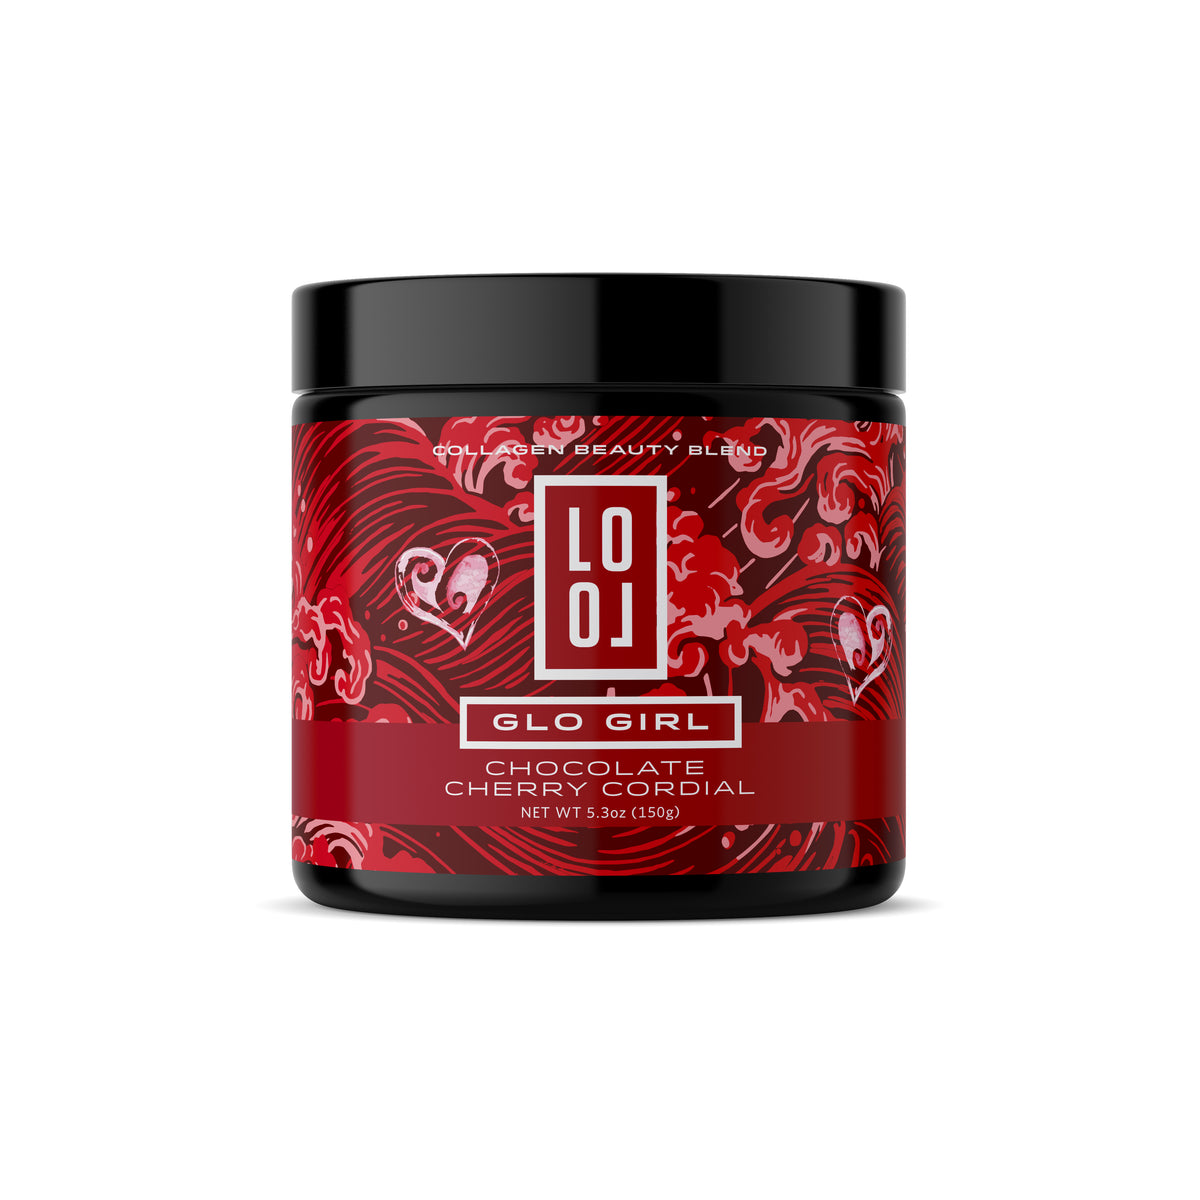 LoLo Glo Girl - Chocolate Cherry Cordial - Collagen Beauty Blend